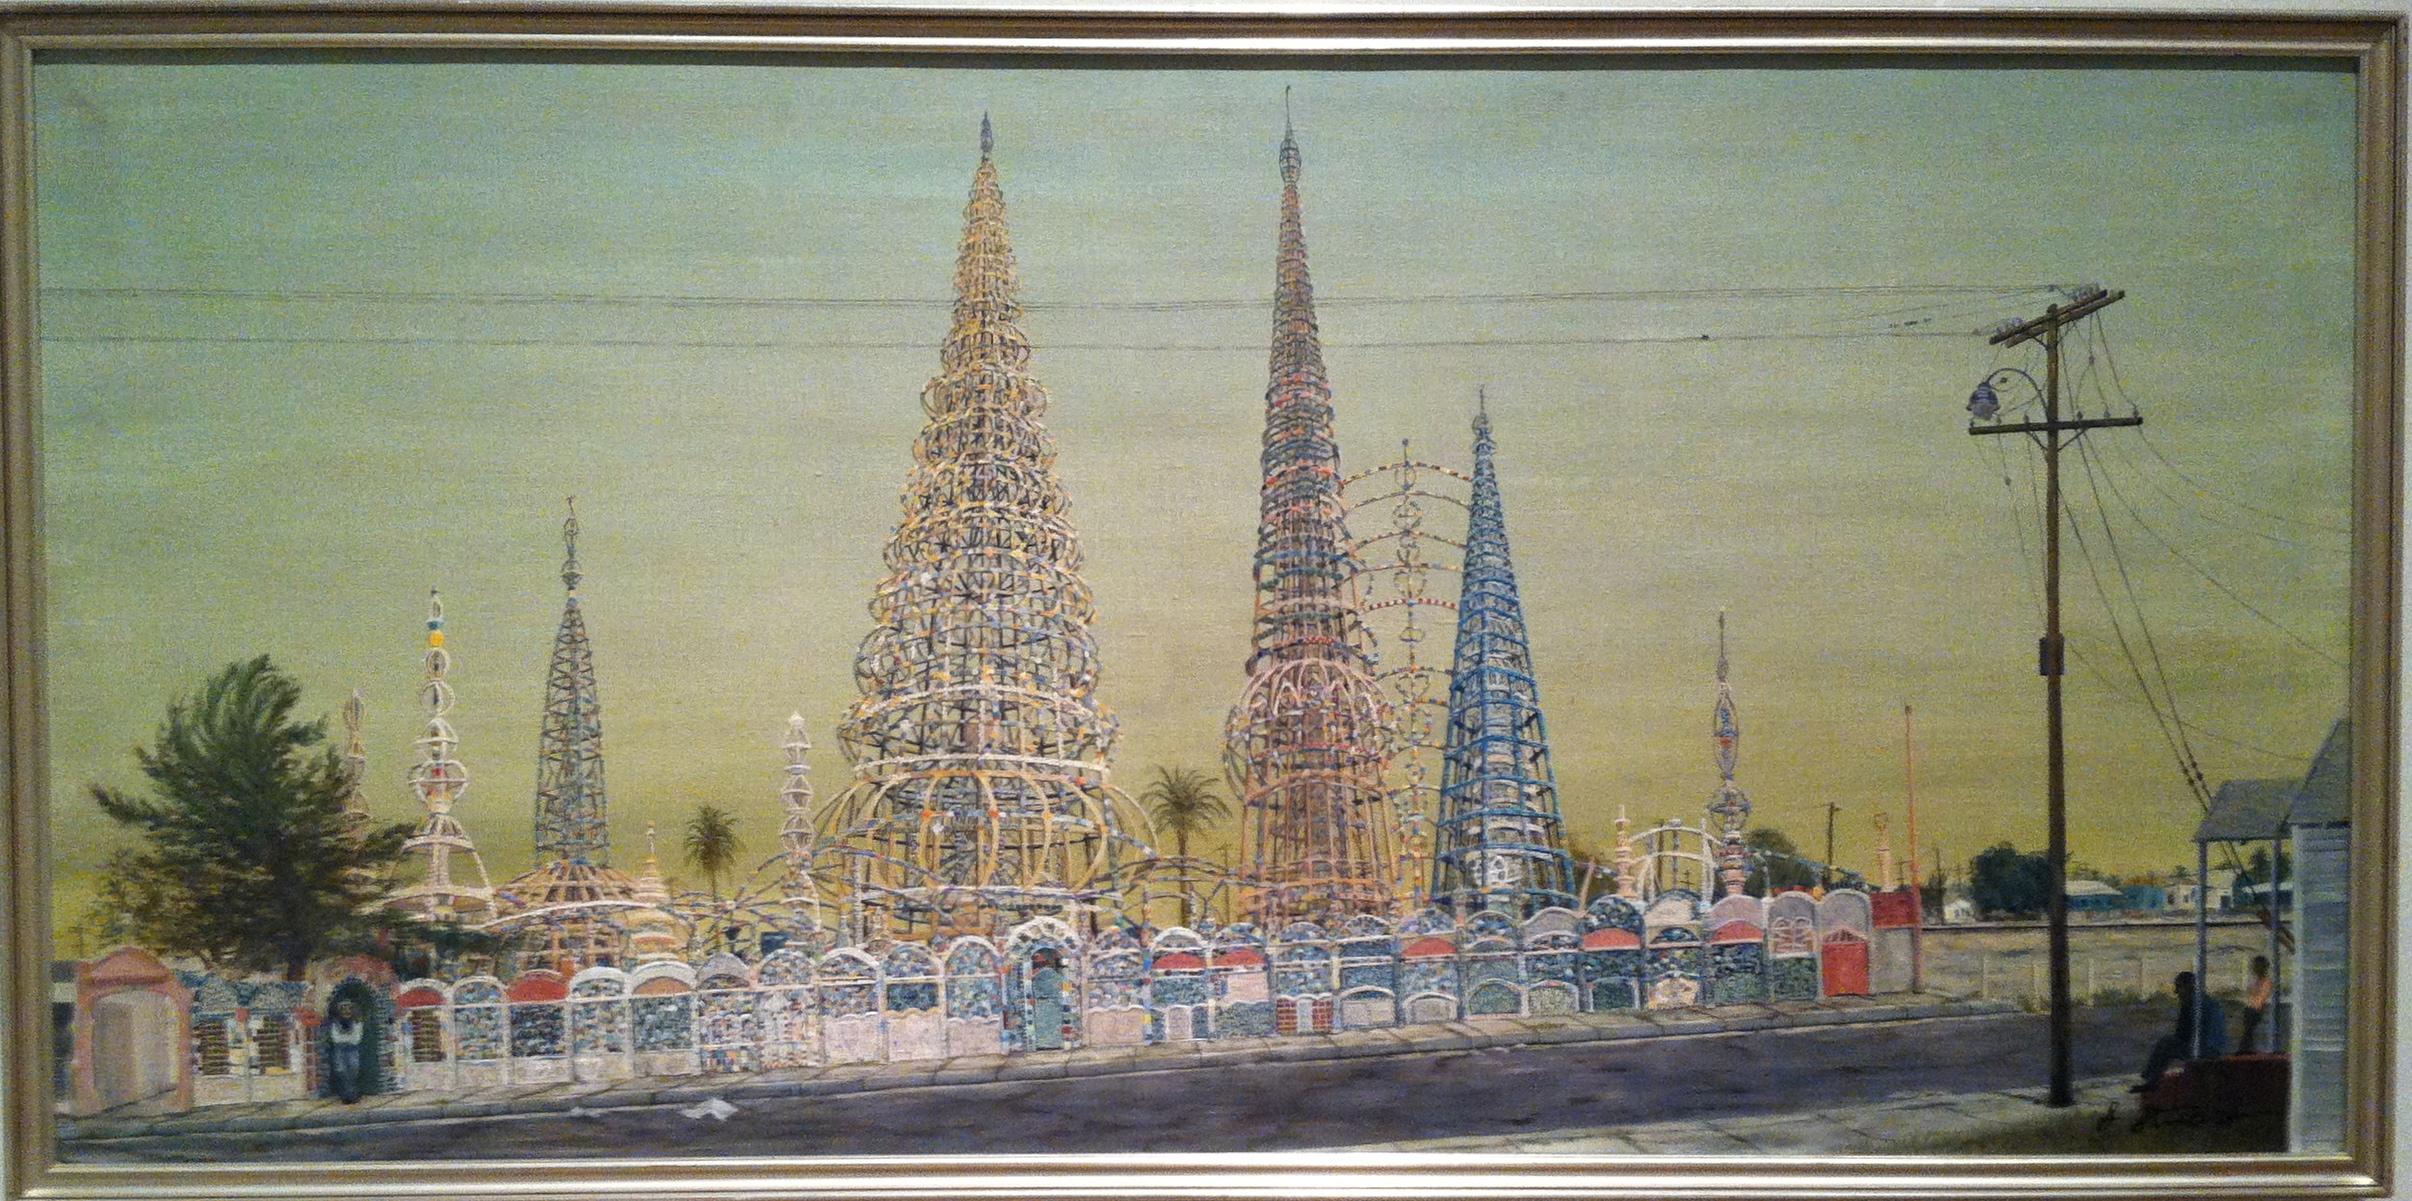 WATTS TOWER For Sale 1